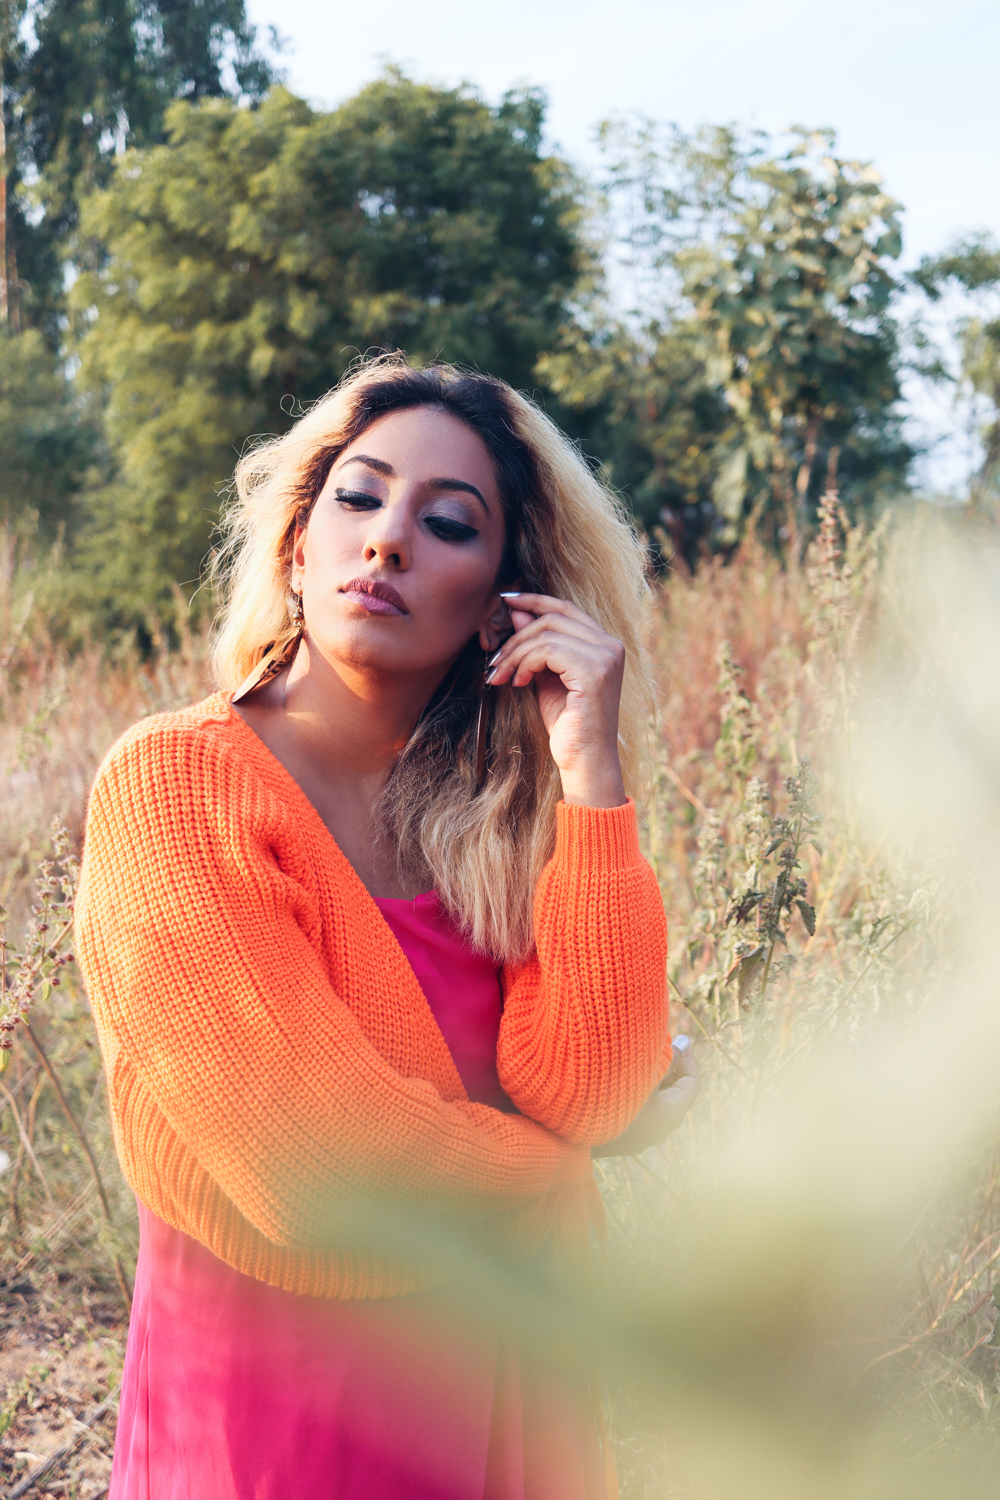 Orange Sweater ; Coral ; Hot Pink ; Maxi ; Winter Wear; Fall Fashion ; Layering ; Blonde ; Conceptual ; Winter Outfit ; Runway Fashion ; Color Pop ; fashion photography ; ootd ; fall look ; winter Fashion ; zaful ; fall 18 ; Hyderabad ; Editorial ; Naznin ; Naznin Suhaer ; dusky; model ; indian blogger ; hyderabad fashion bloggers ; hyderabad bloggers ; hyderabad fashion blogger ; I Dress for the Applause ; 